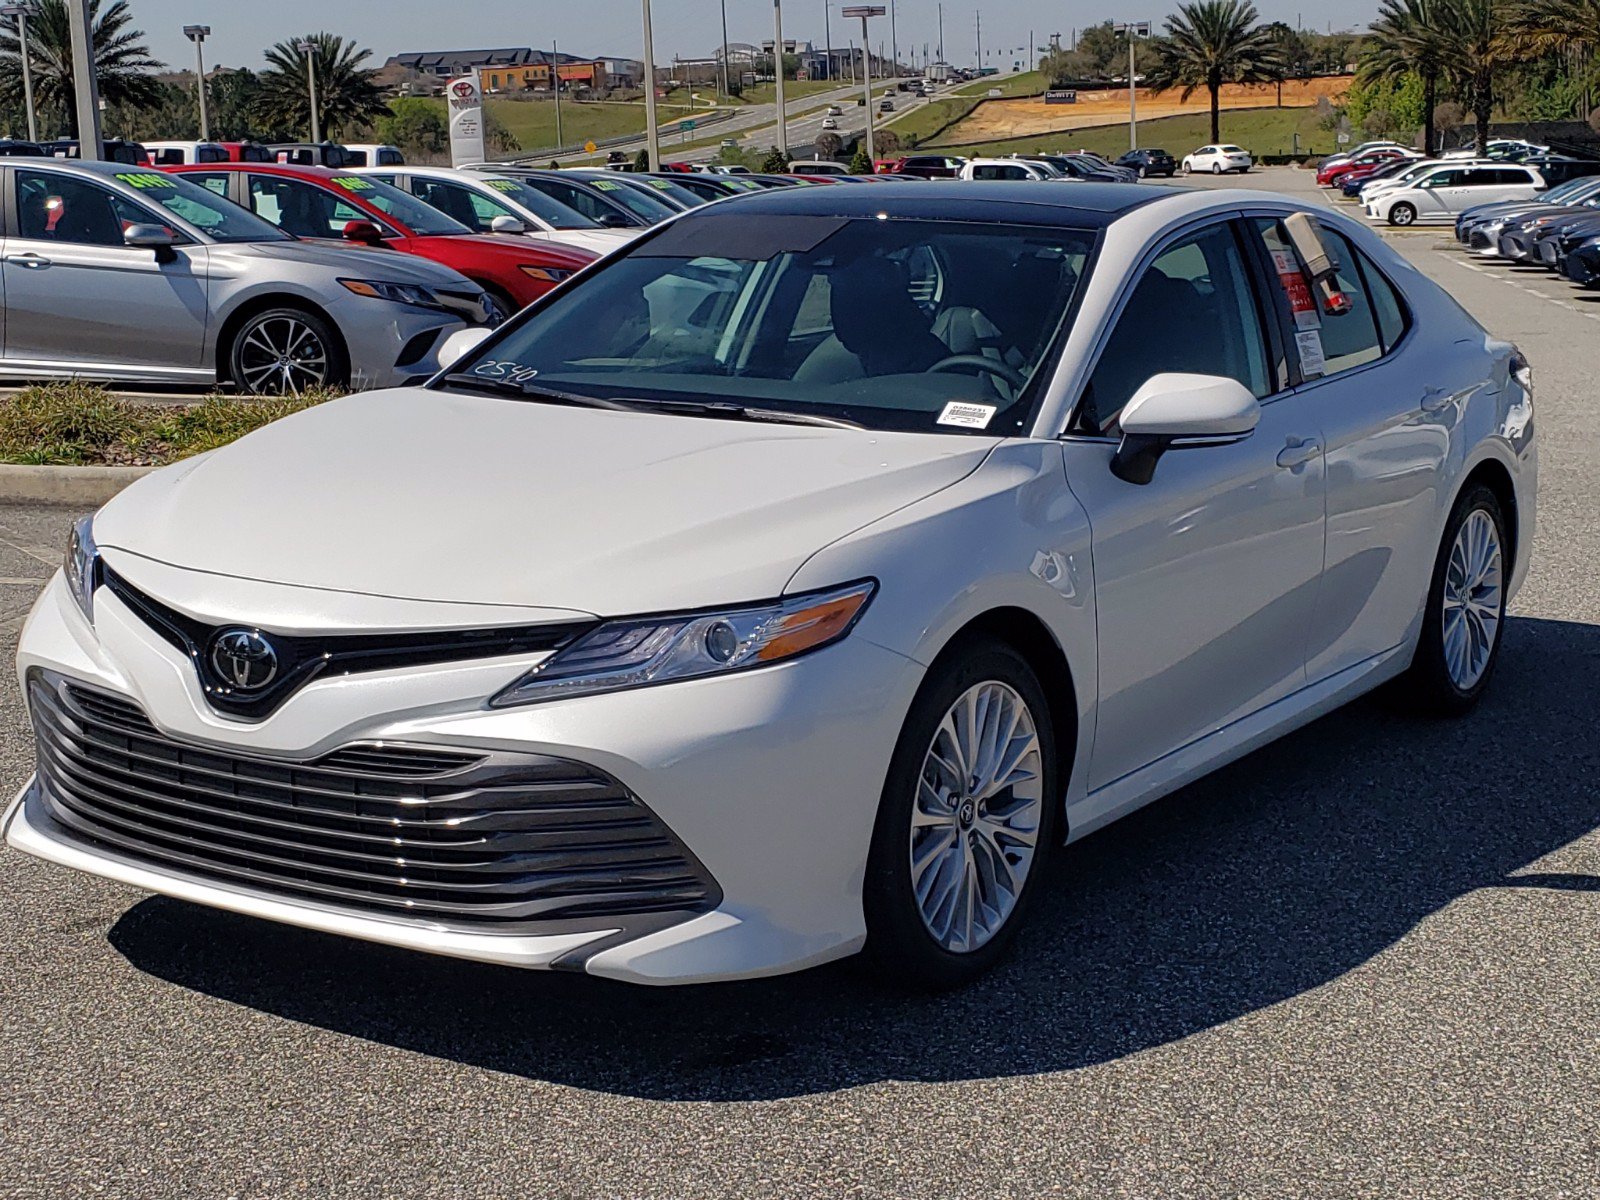 New 2020 Toyota Camry XLE 4dr Car in Clermont #0250231 | Toyota of Clermont